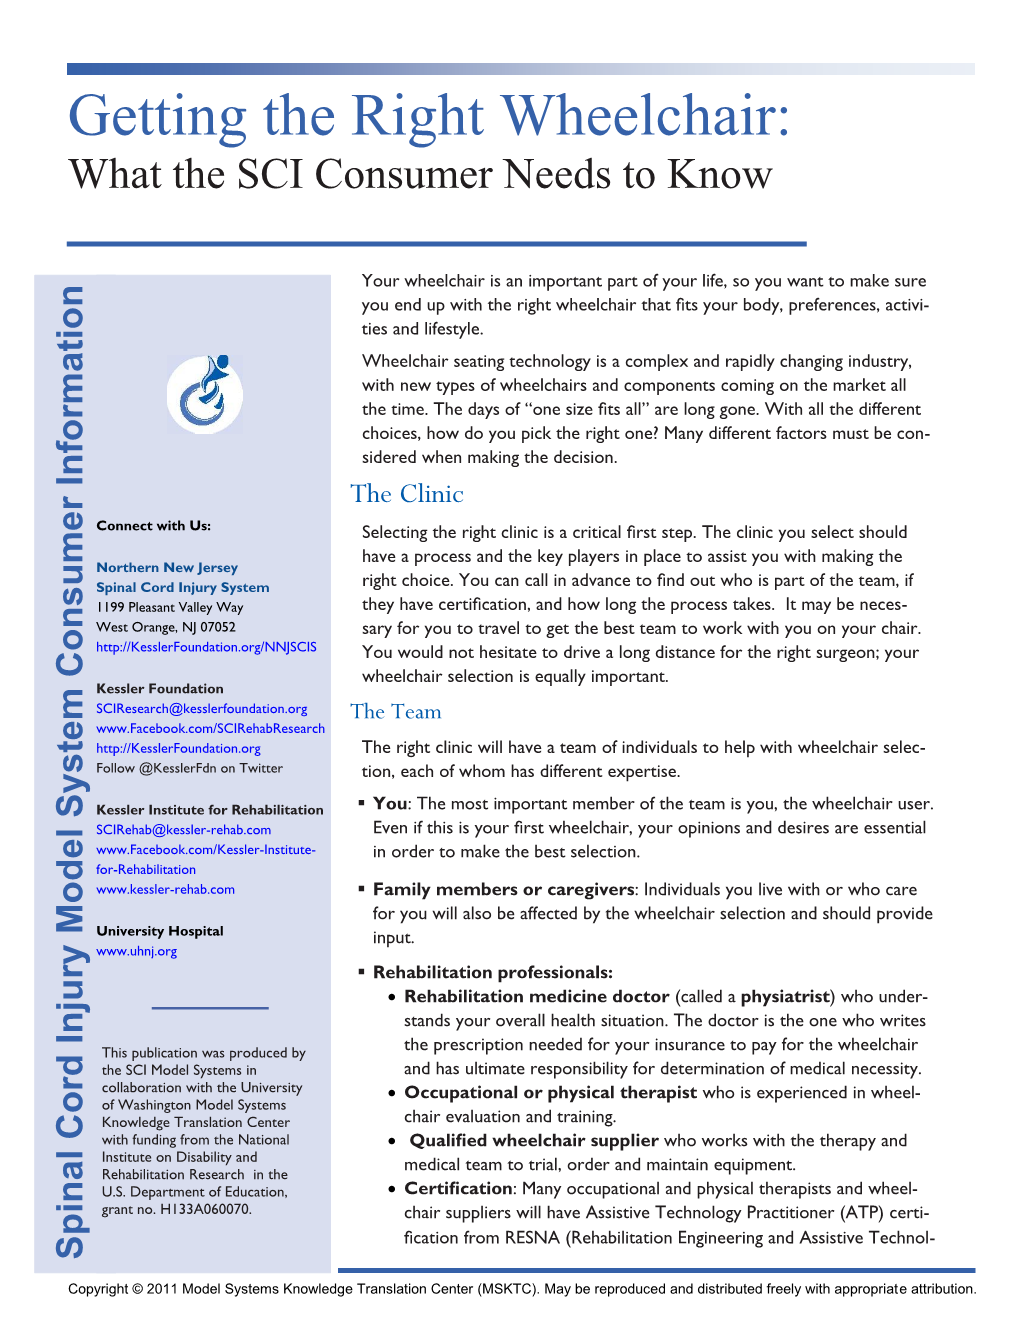 Getting the Right Wheelchair: What the SCI Consumer Needs to Know